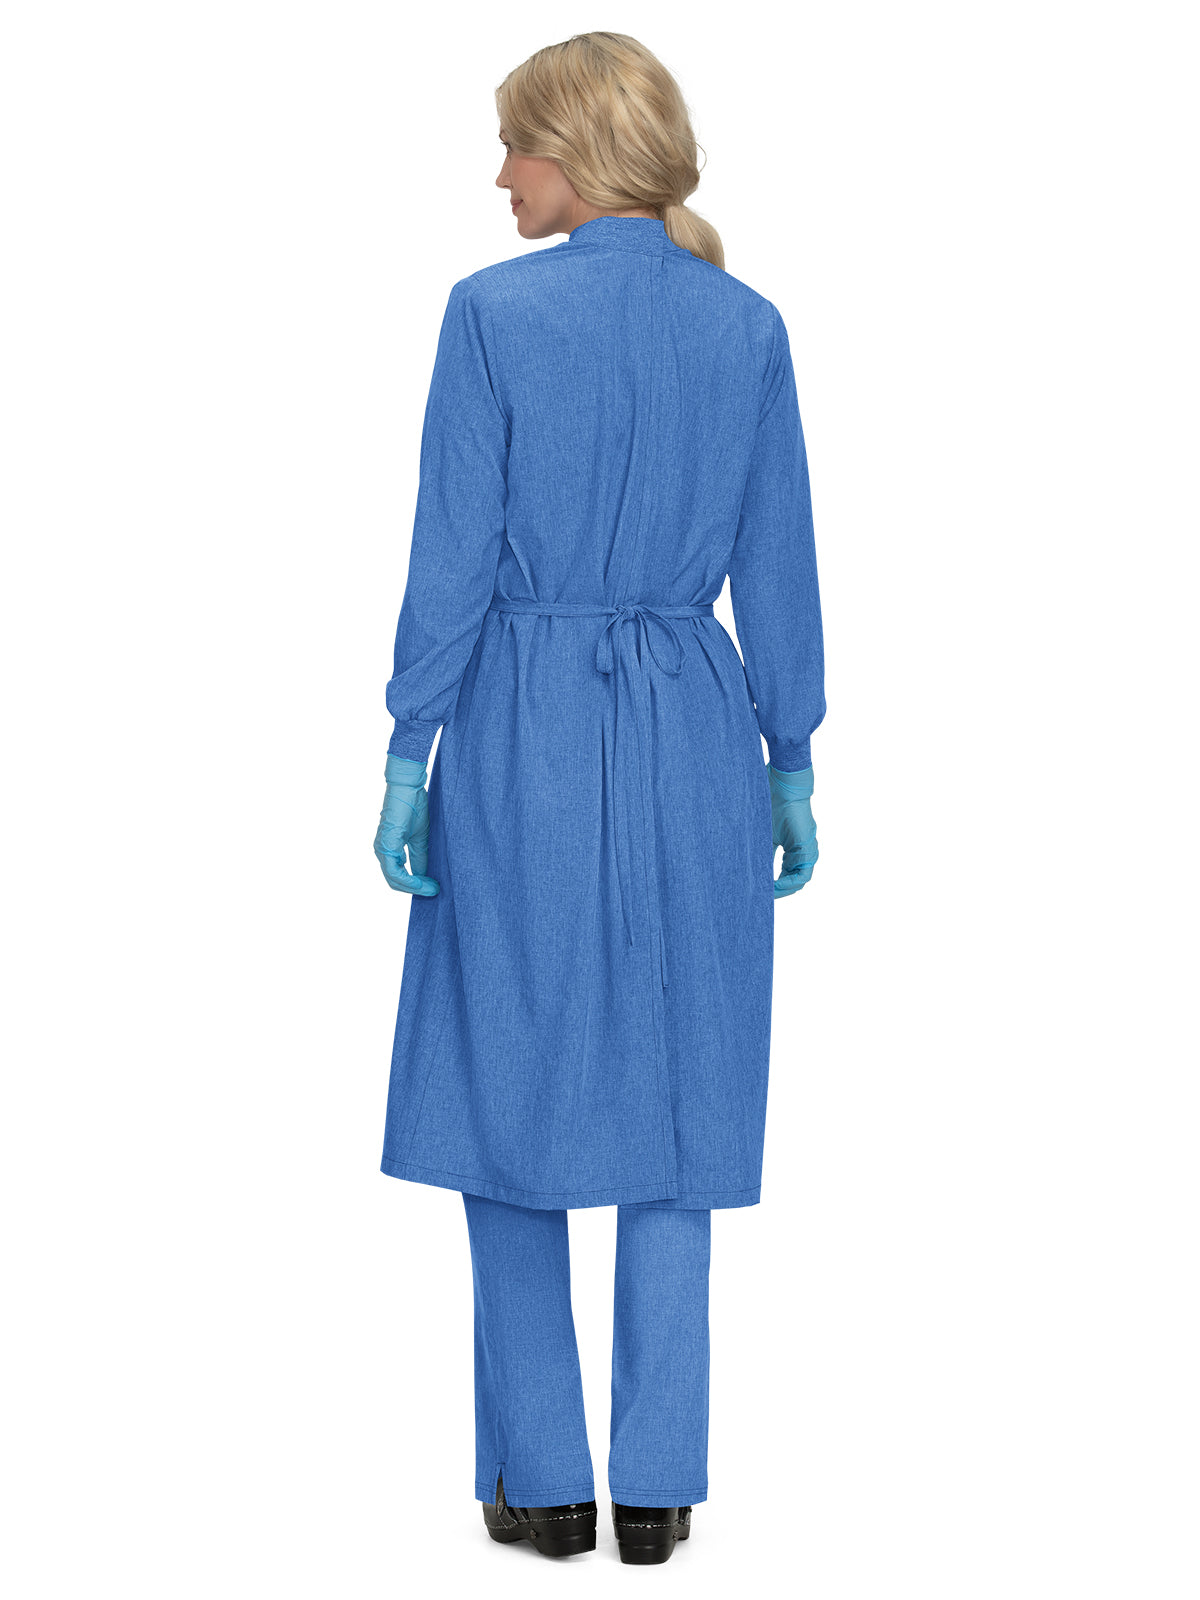 Clinical Gown